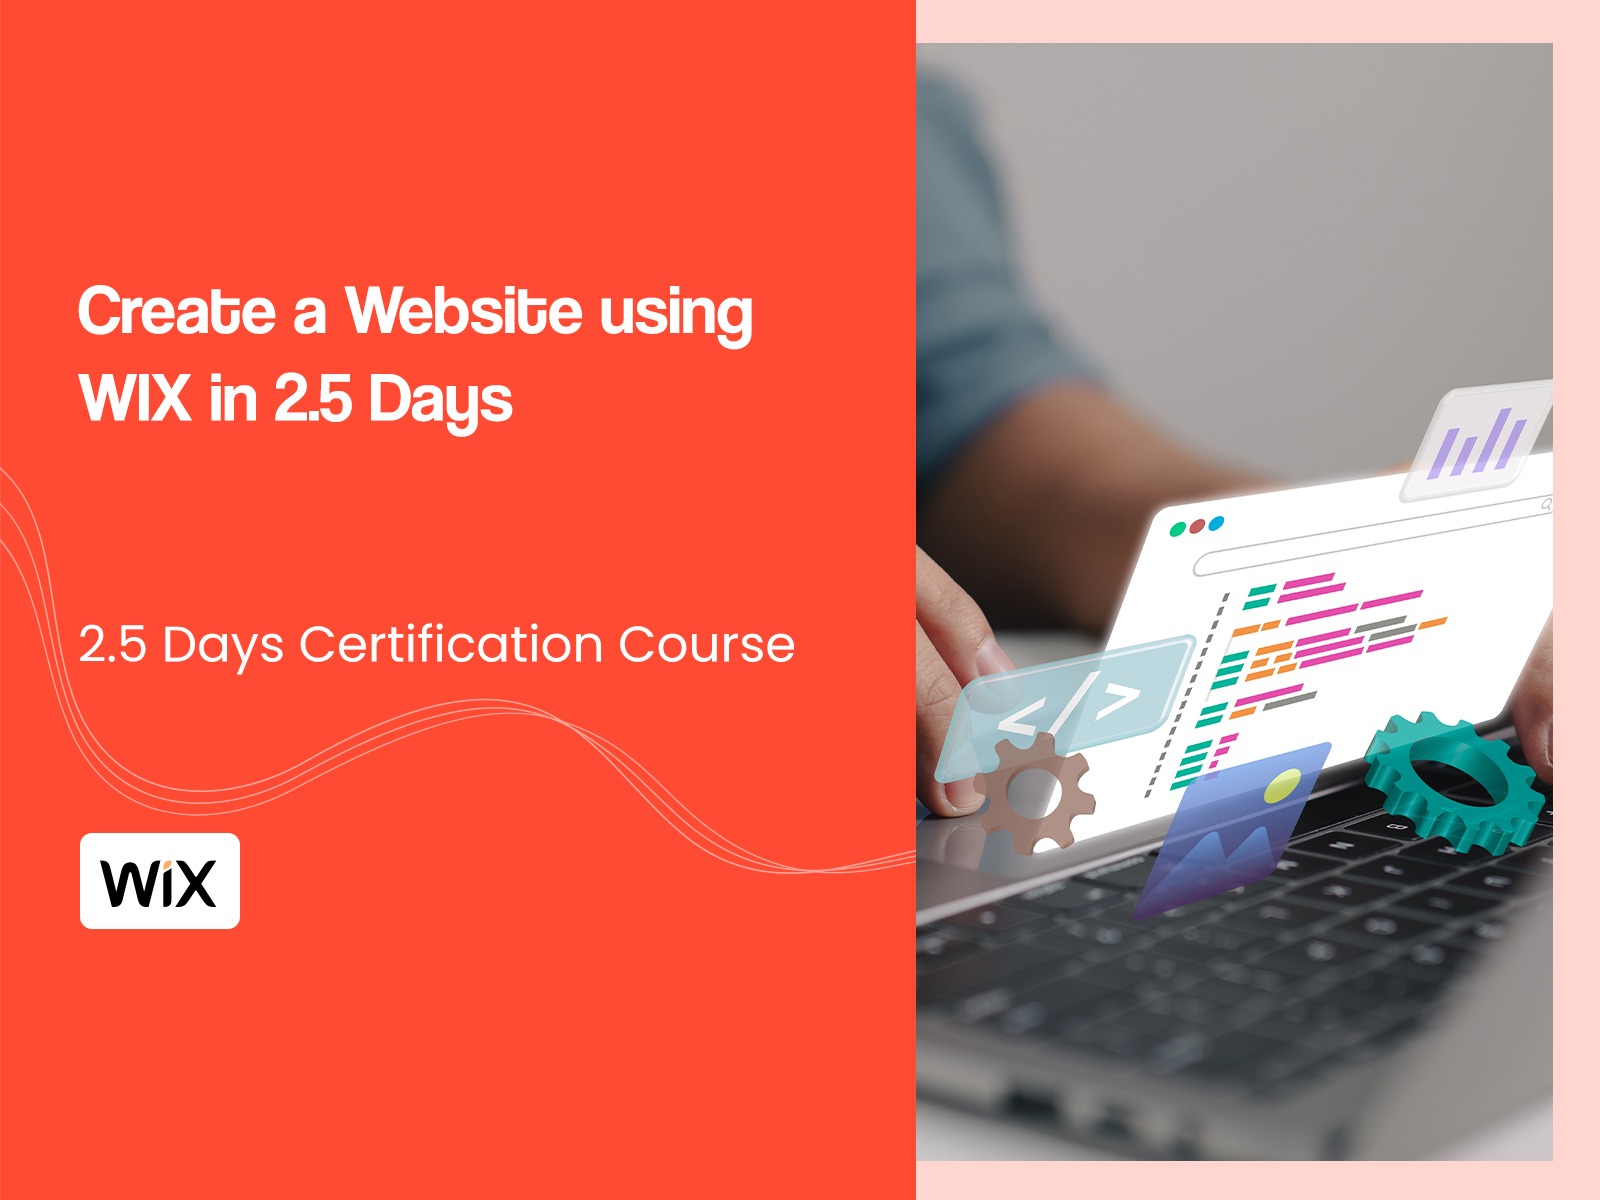 Create a Website using WIX course in Singapore